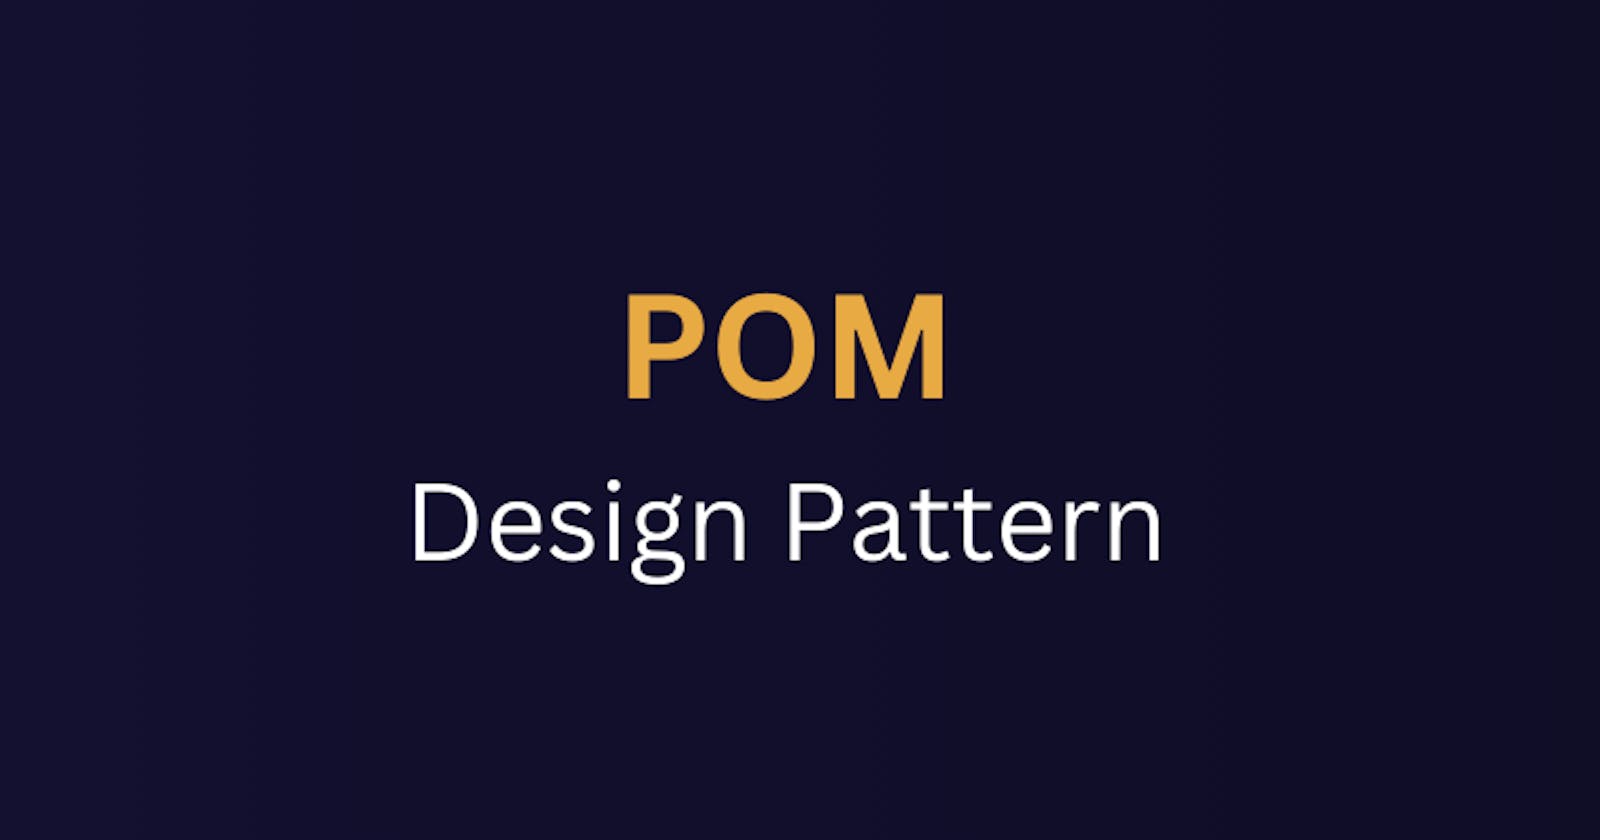 How to Implement POM Design Pattern with Selenium